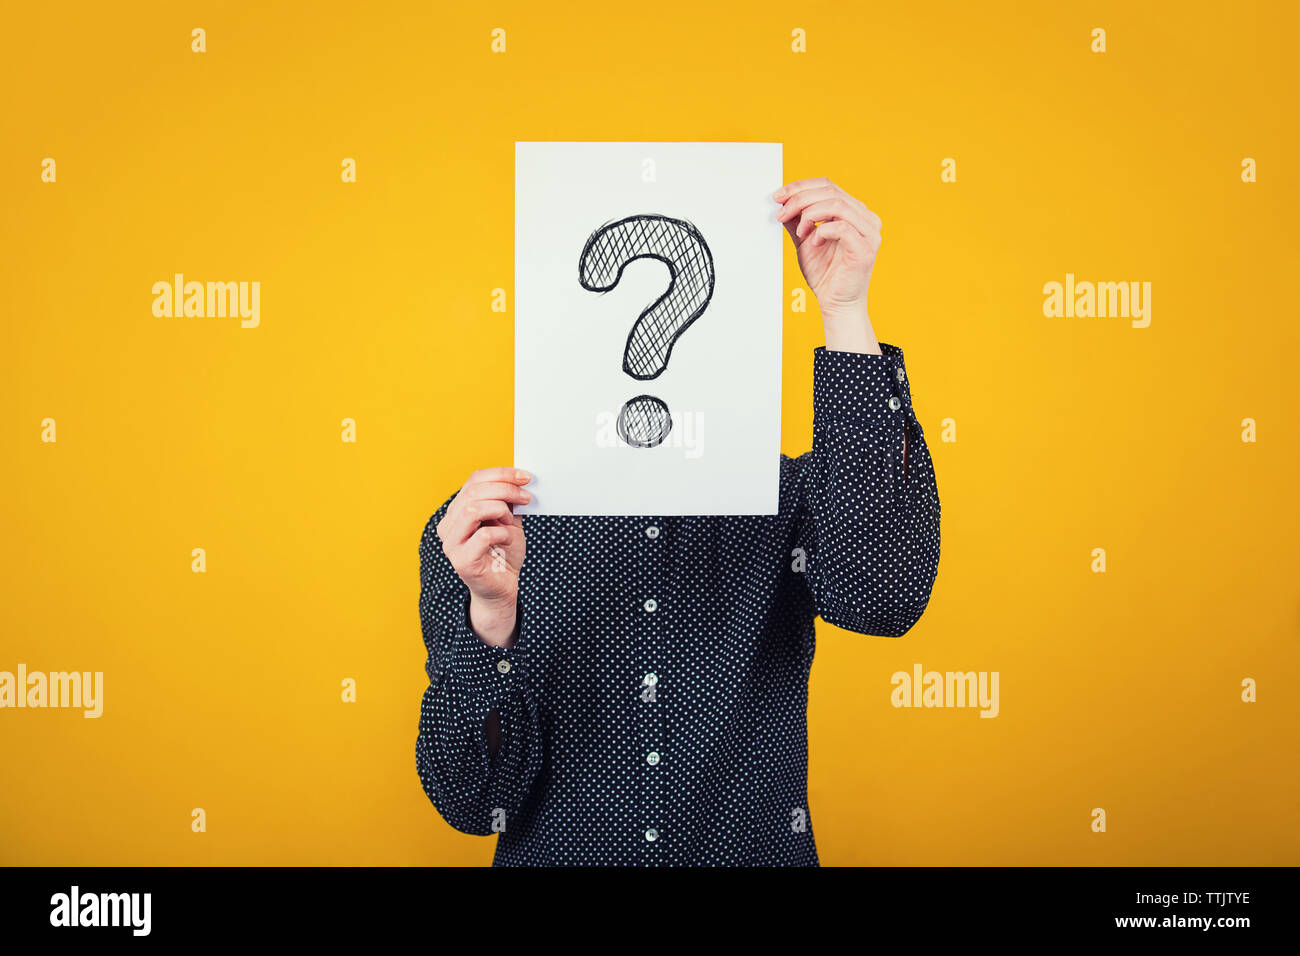 Businesswoman covering face using a white paper sheet with drawn question mark, like a mask, for hiding her identity. Isolated on yellow wall backgrou Stock Photo